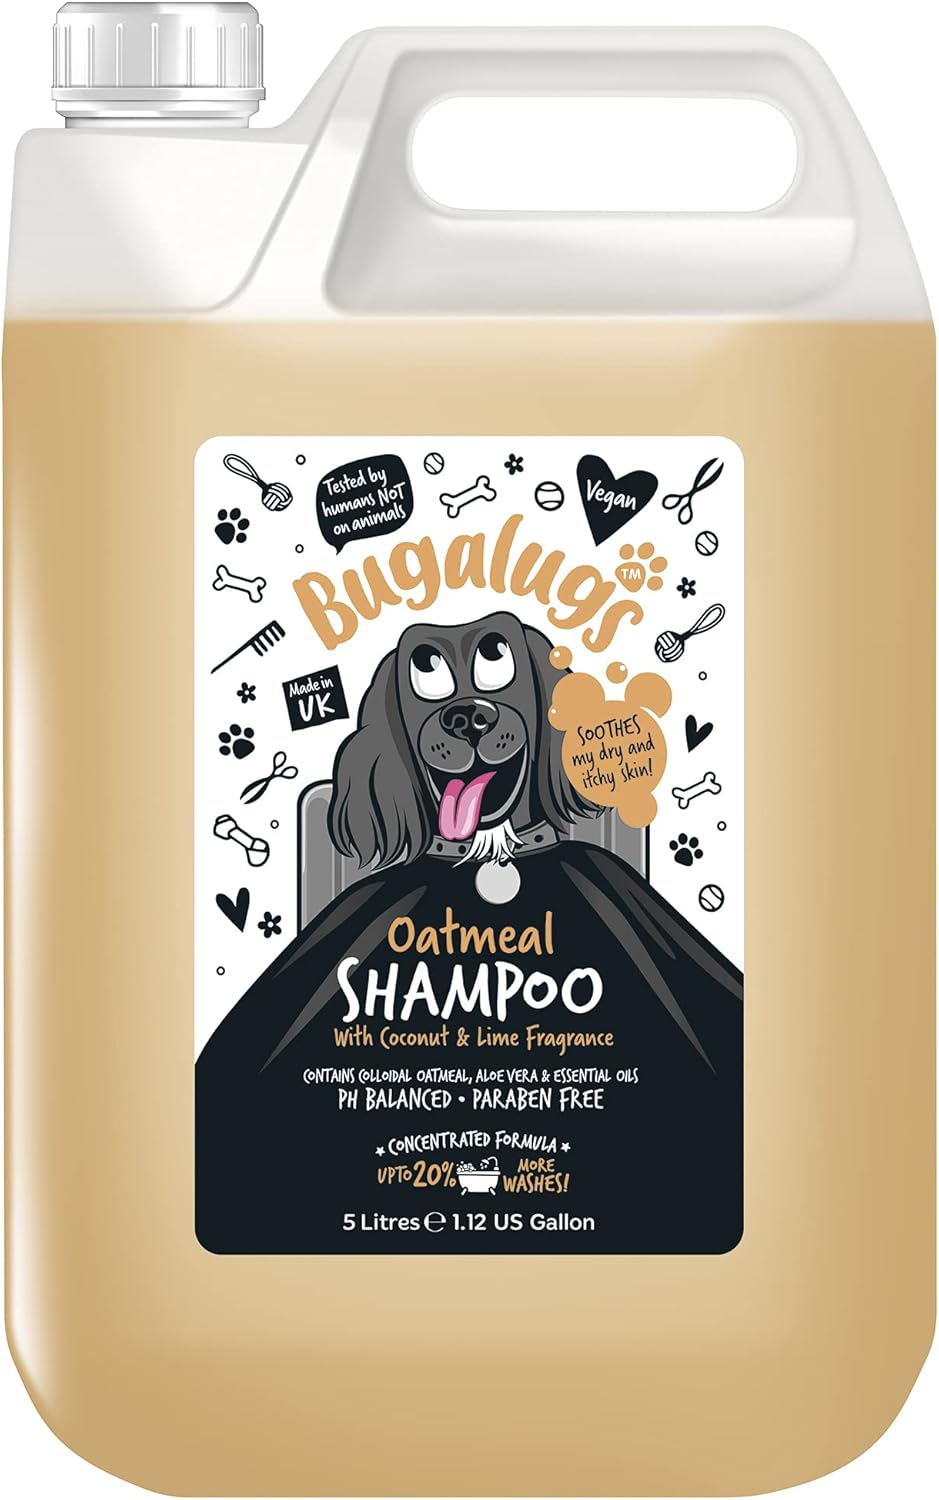 BUGALUGS Oatmeal & Aloe Vera Dog Shampoo dog grooming shampoo products for smelly dogs with fragrance, oatmeal puppy shampoo, professional Vegan pet shampoo & conditioner (5 Litre)?BSHCL5L